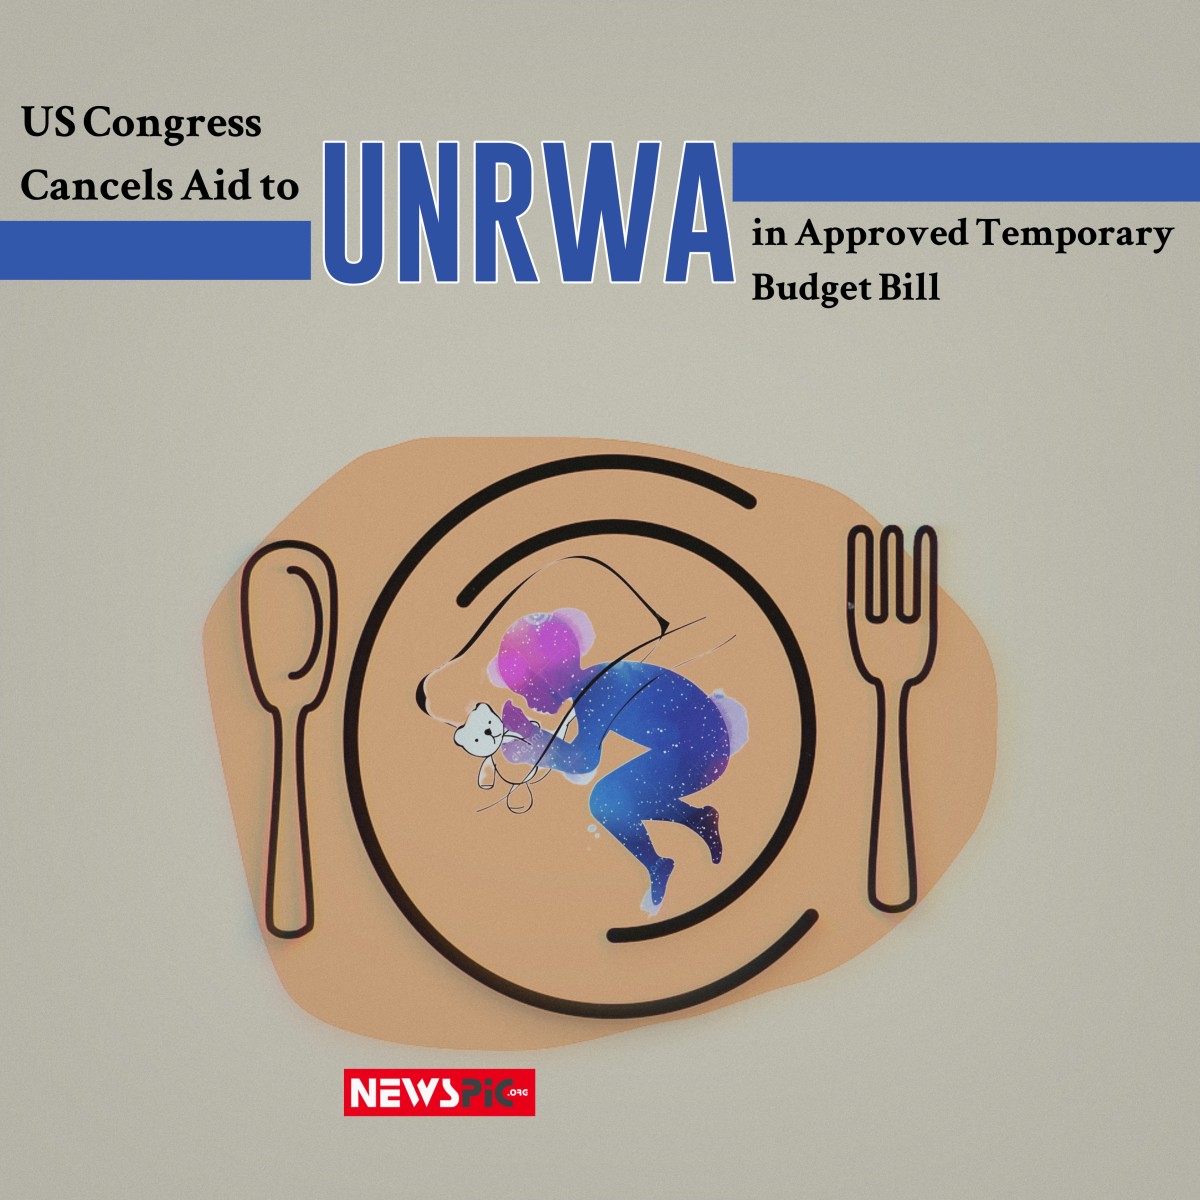 US Congress Cancels Aid to UNRWA